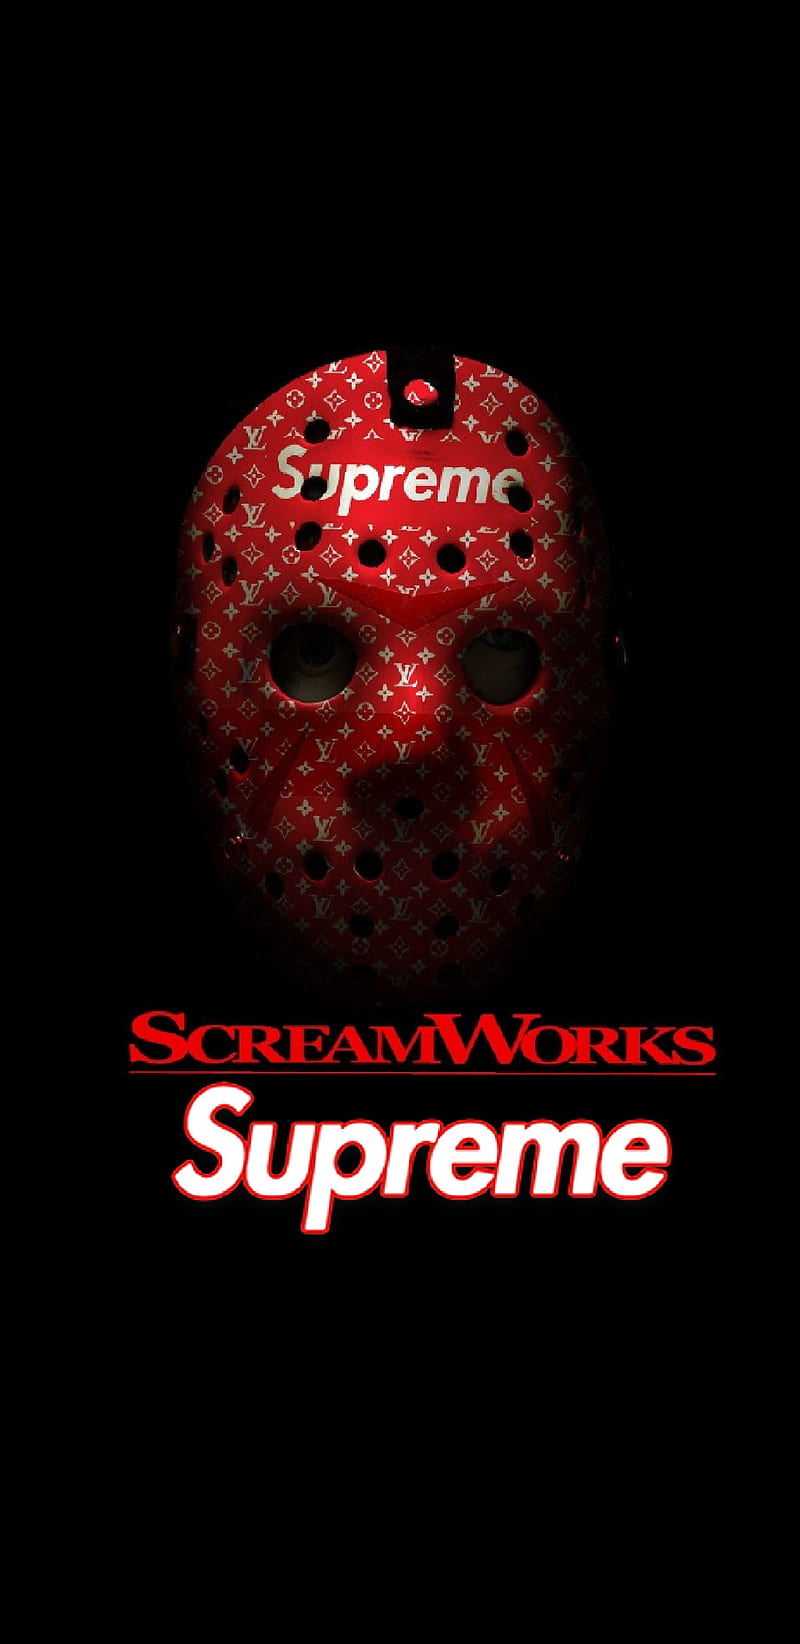 LV Supreme wallpaper by Br0kn - Download on ZEDGE™